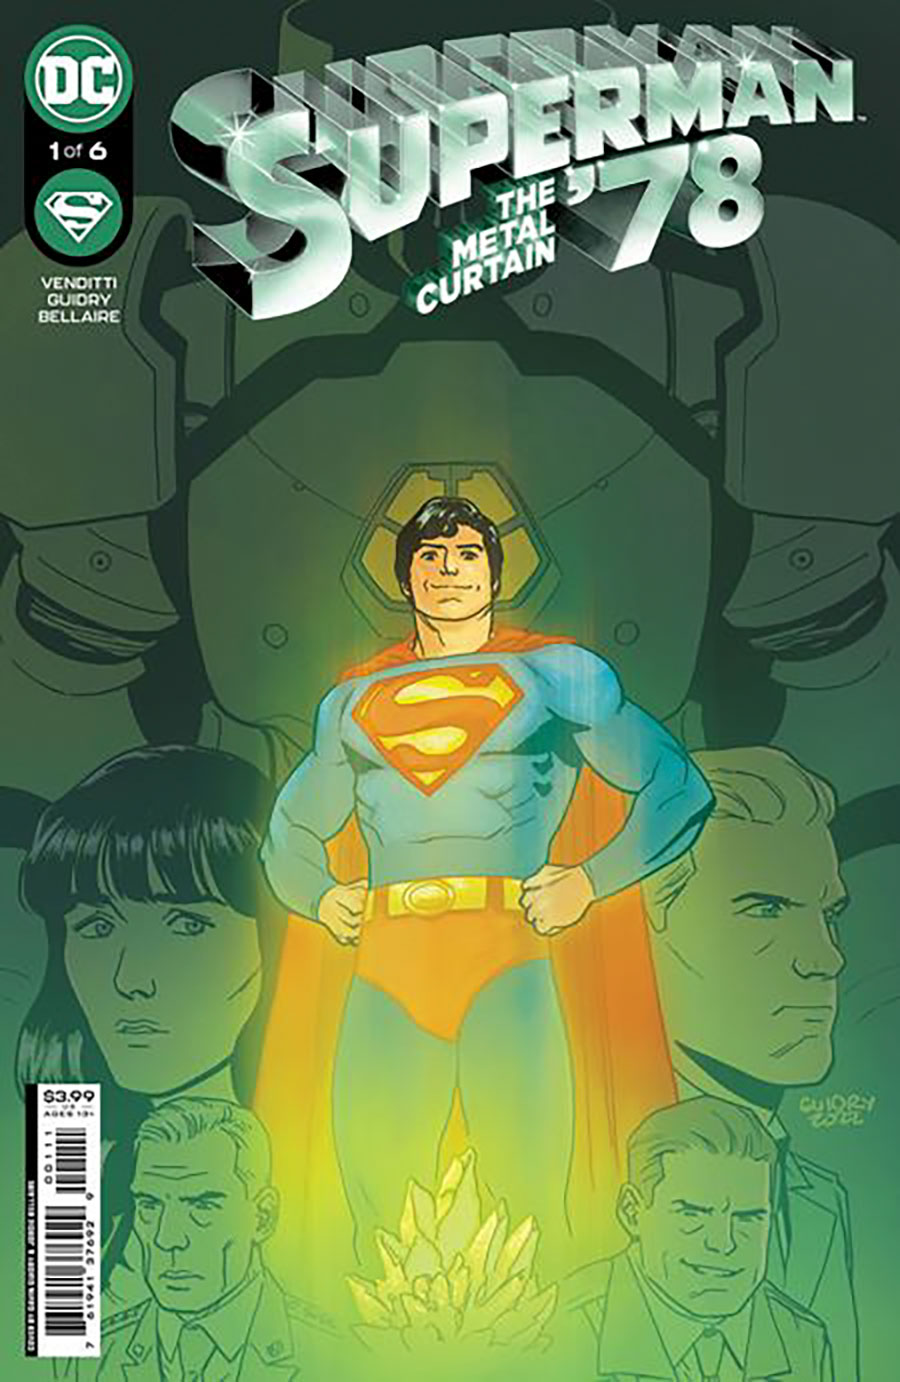 Superman 78 The Metal Curtain #1 Cover A Regular Gavin Guidry Cover